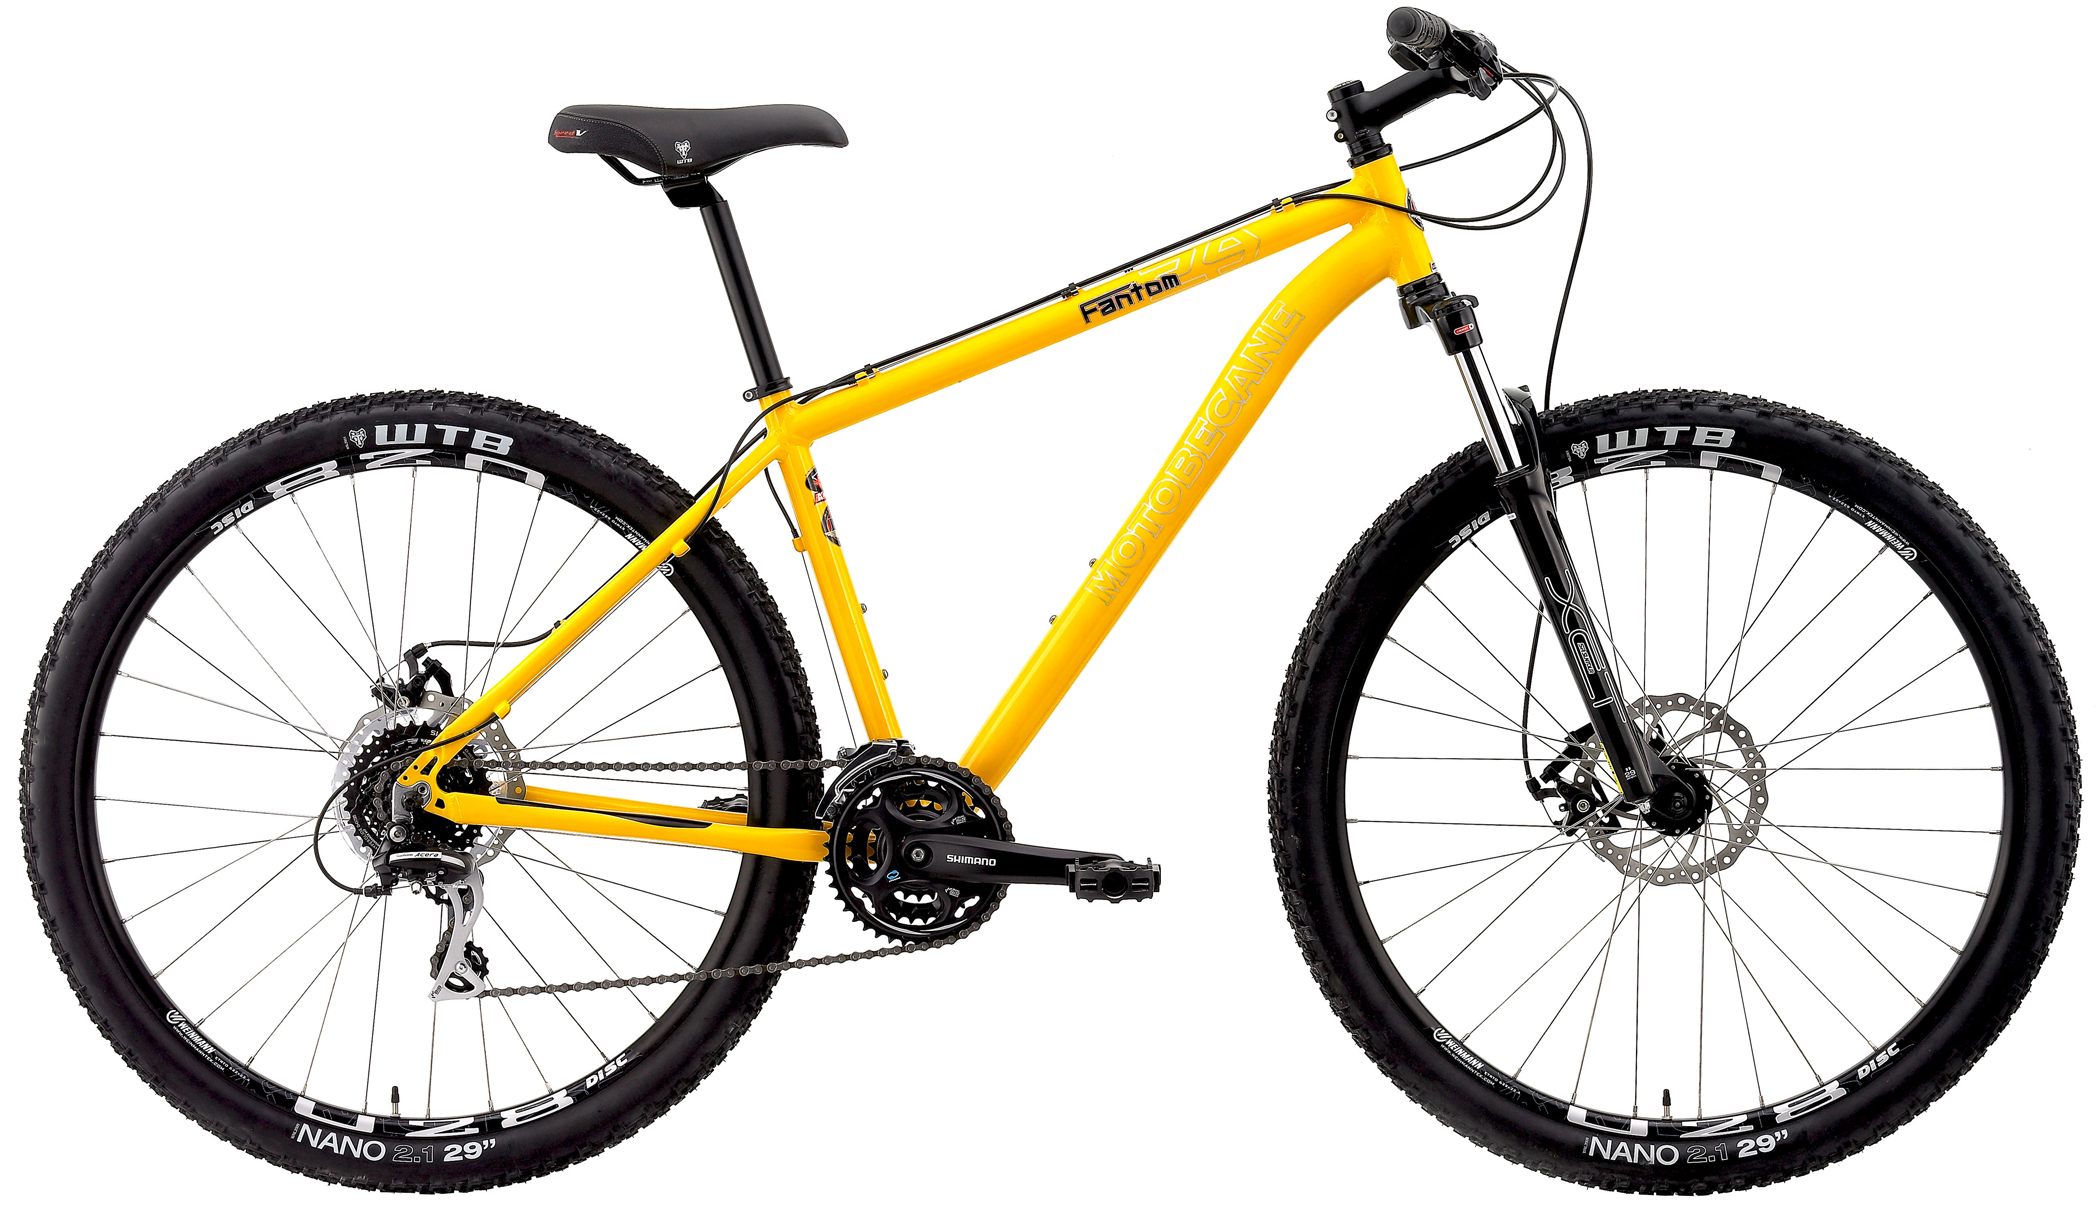 Free Ship 48, Save up to 60% off new 29er Mountain Bikes - MTB ...